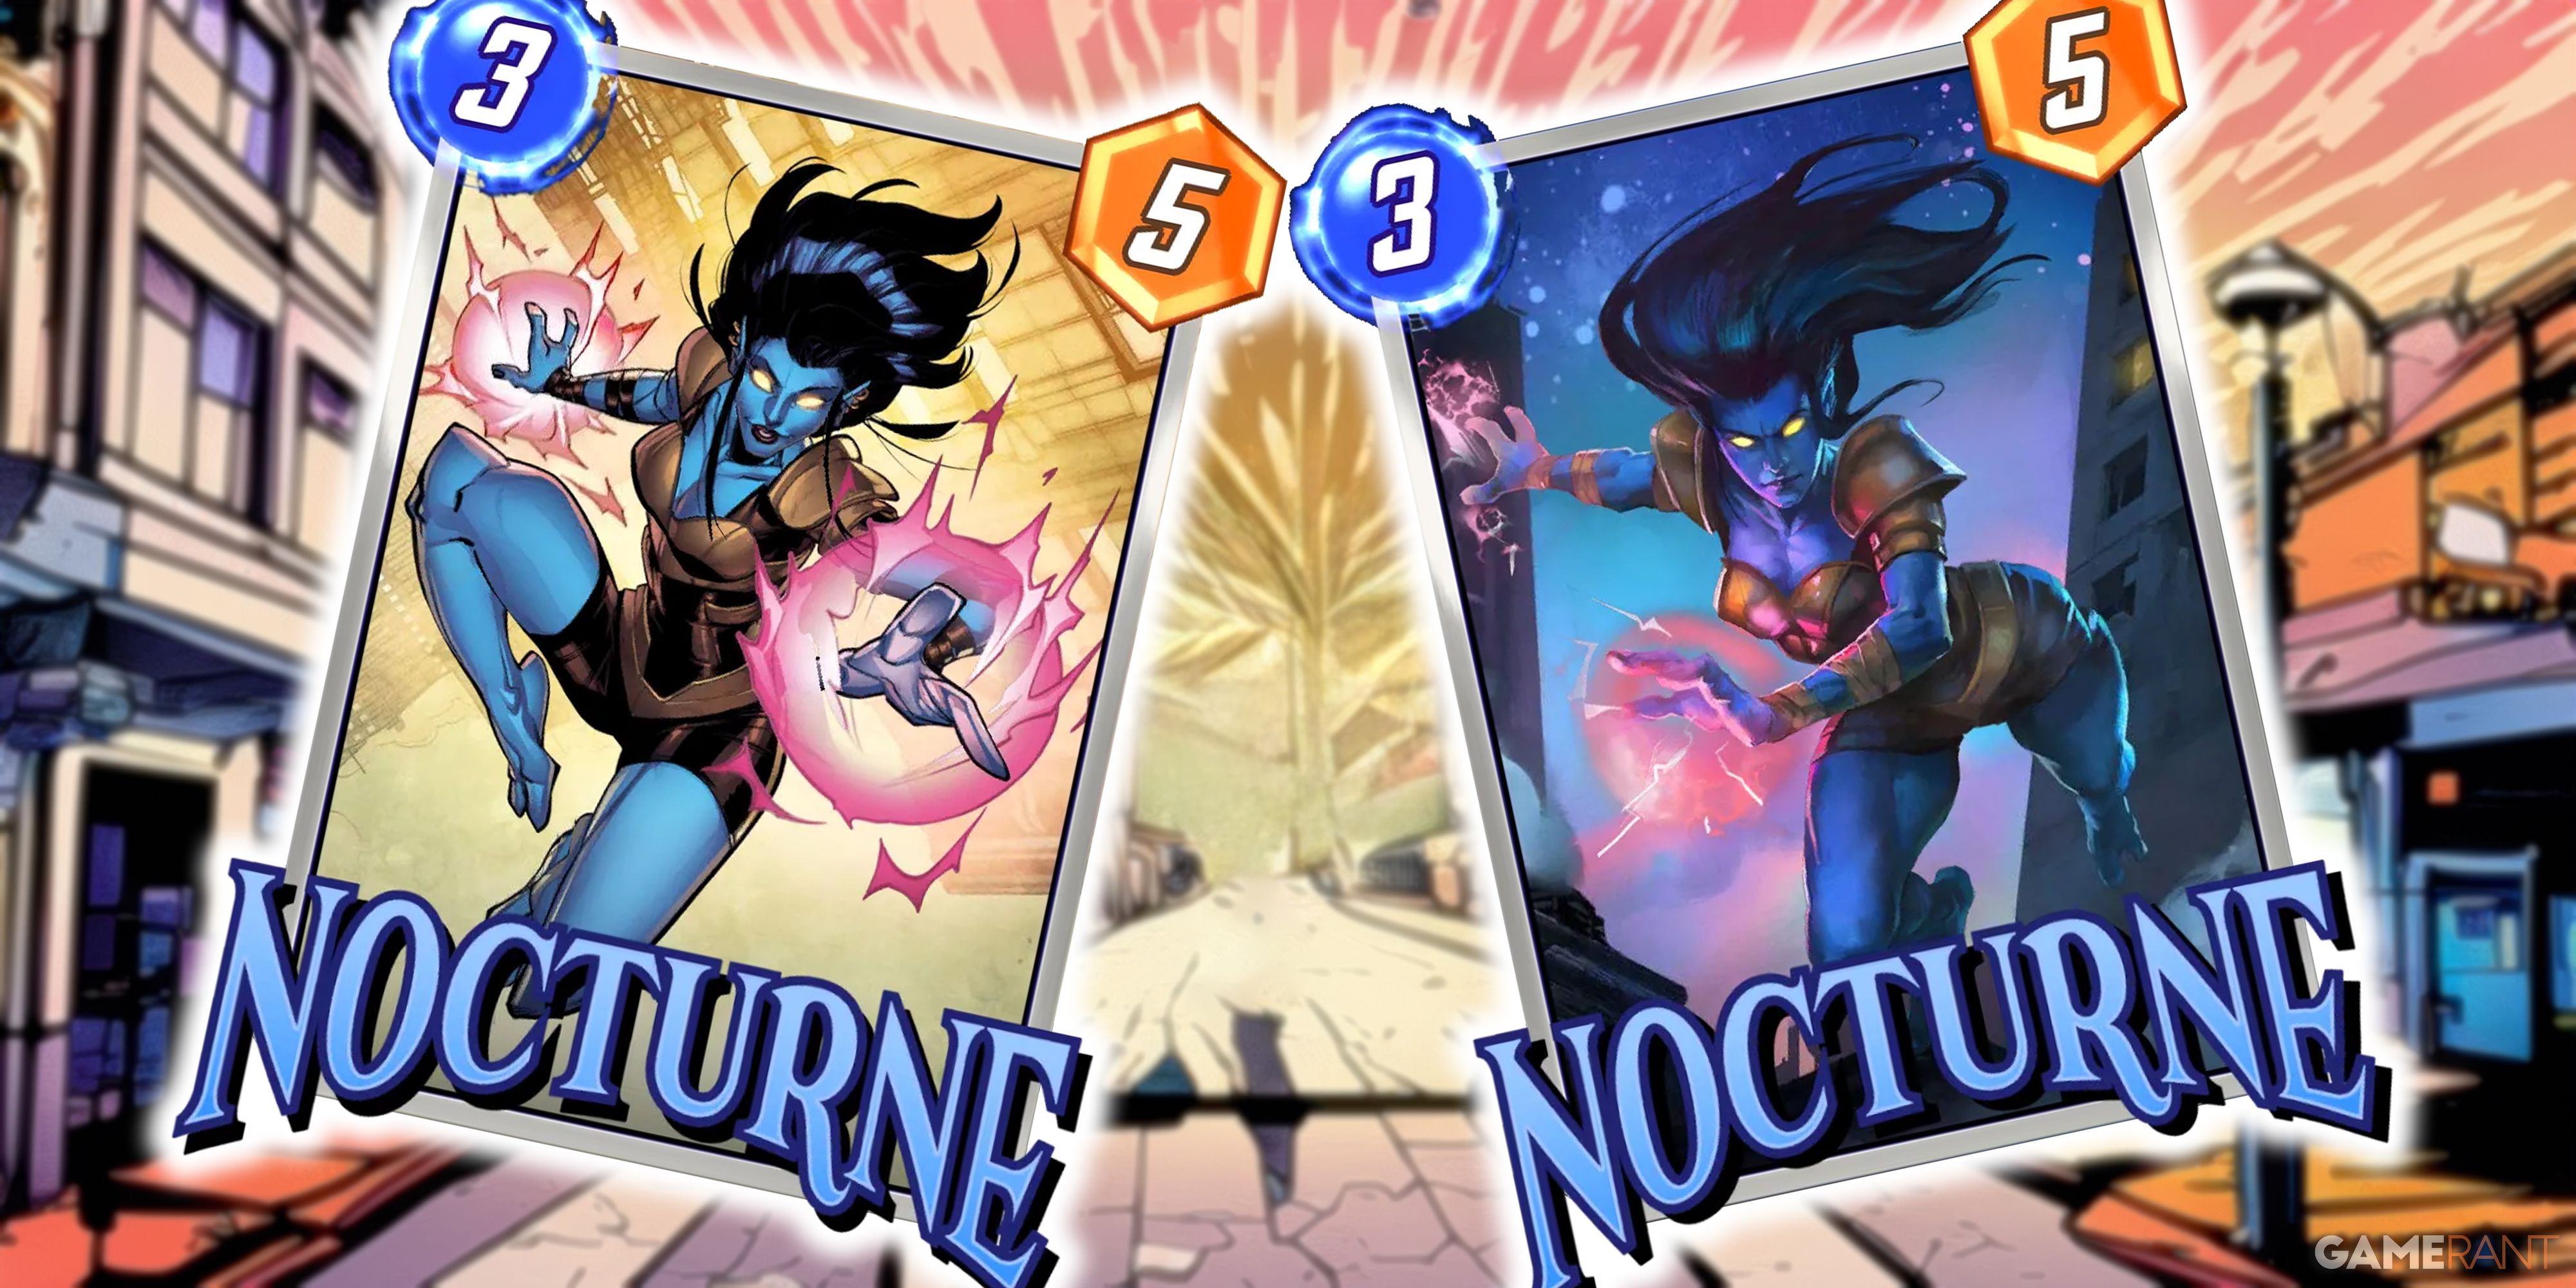 Marvel Snap's Nocturne card next to another Nocturne variant.